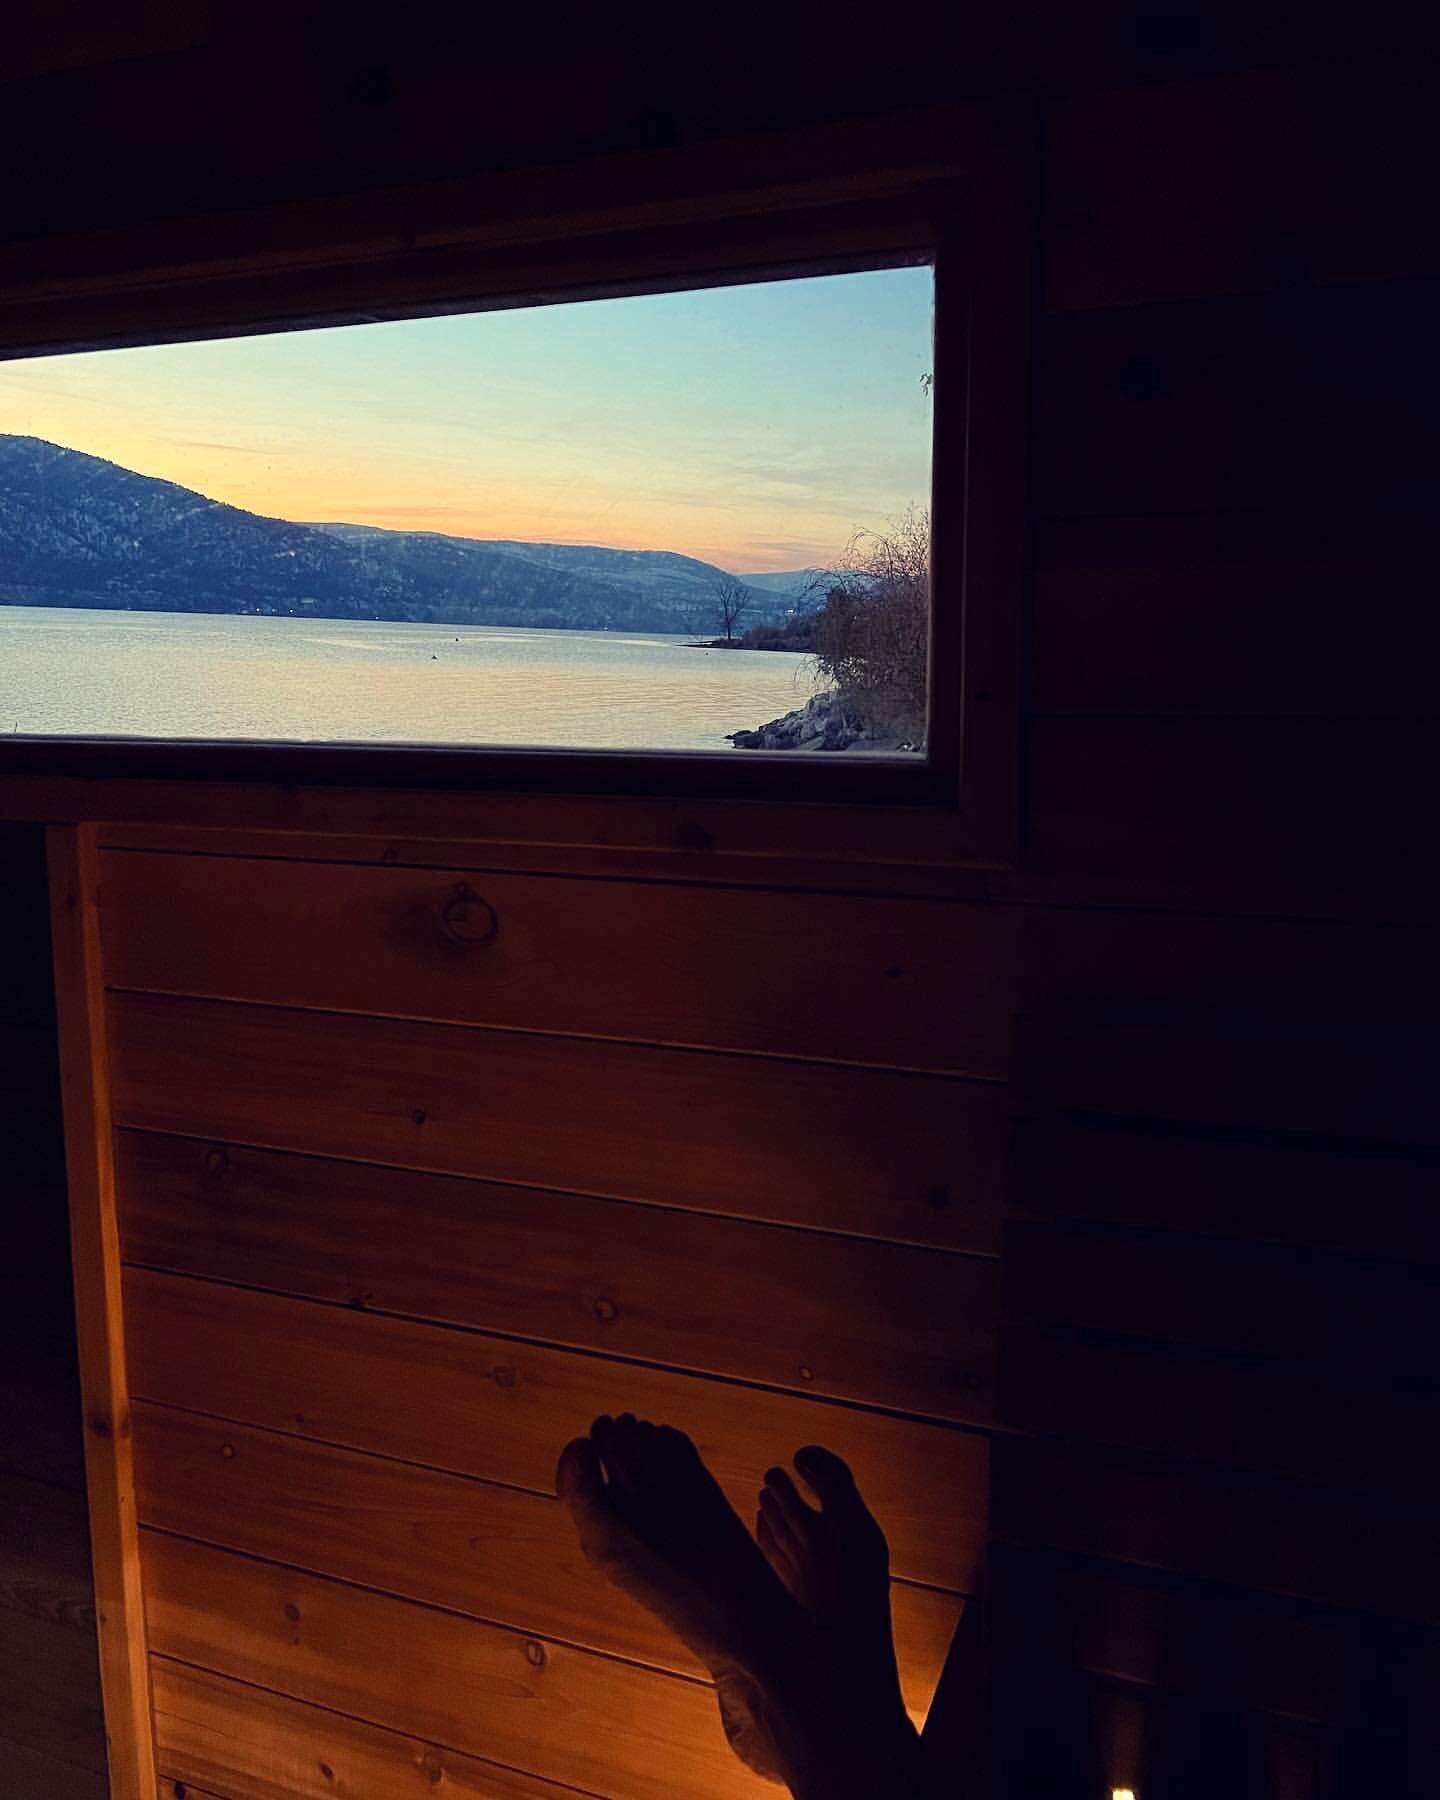 REPOST @hootshideout
&ldquo;Sunset sweat sessions and a few rounds of cold dips = perfection!

Thanks @backwoods_sauna 

Can&rsquo;t wait for more wknds like this!&rdquo;

~ These guys @hootshideout have got it made with their Air BnB right on Okanag